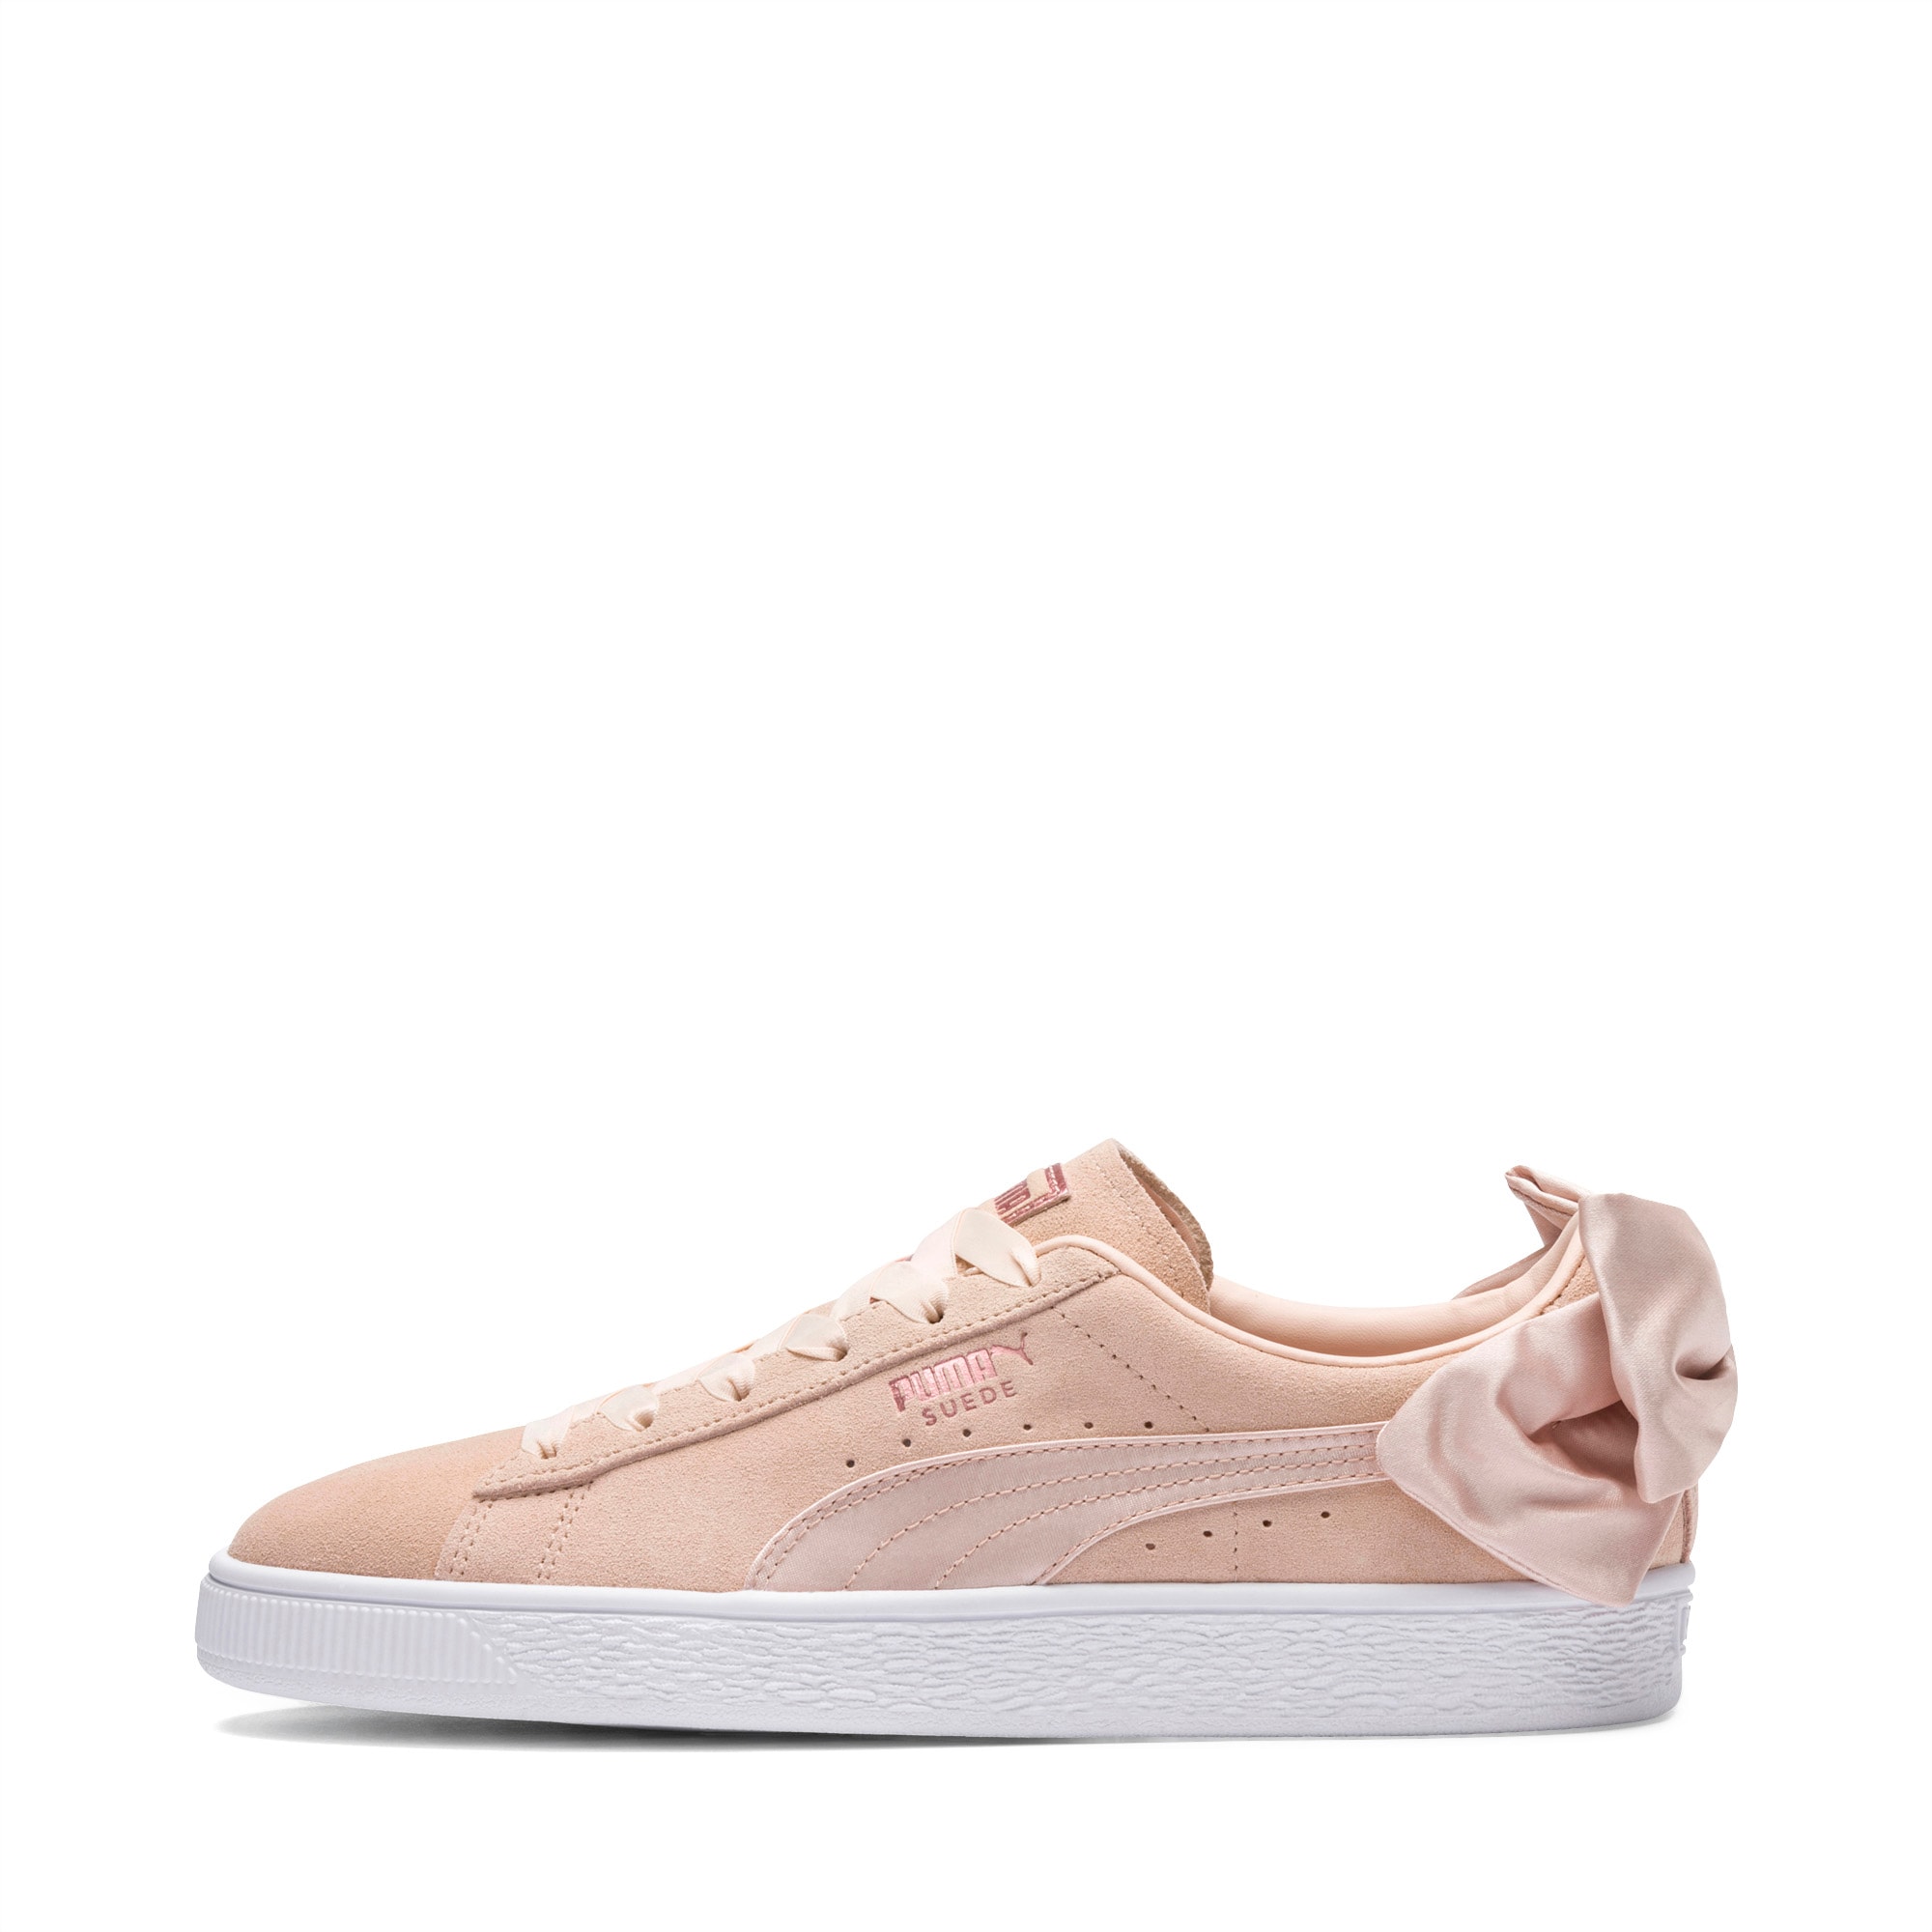 Suede Bow Valentine Women's Trainers 